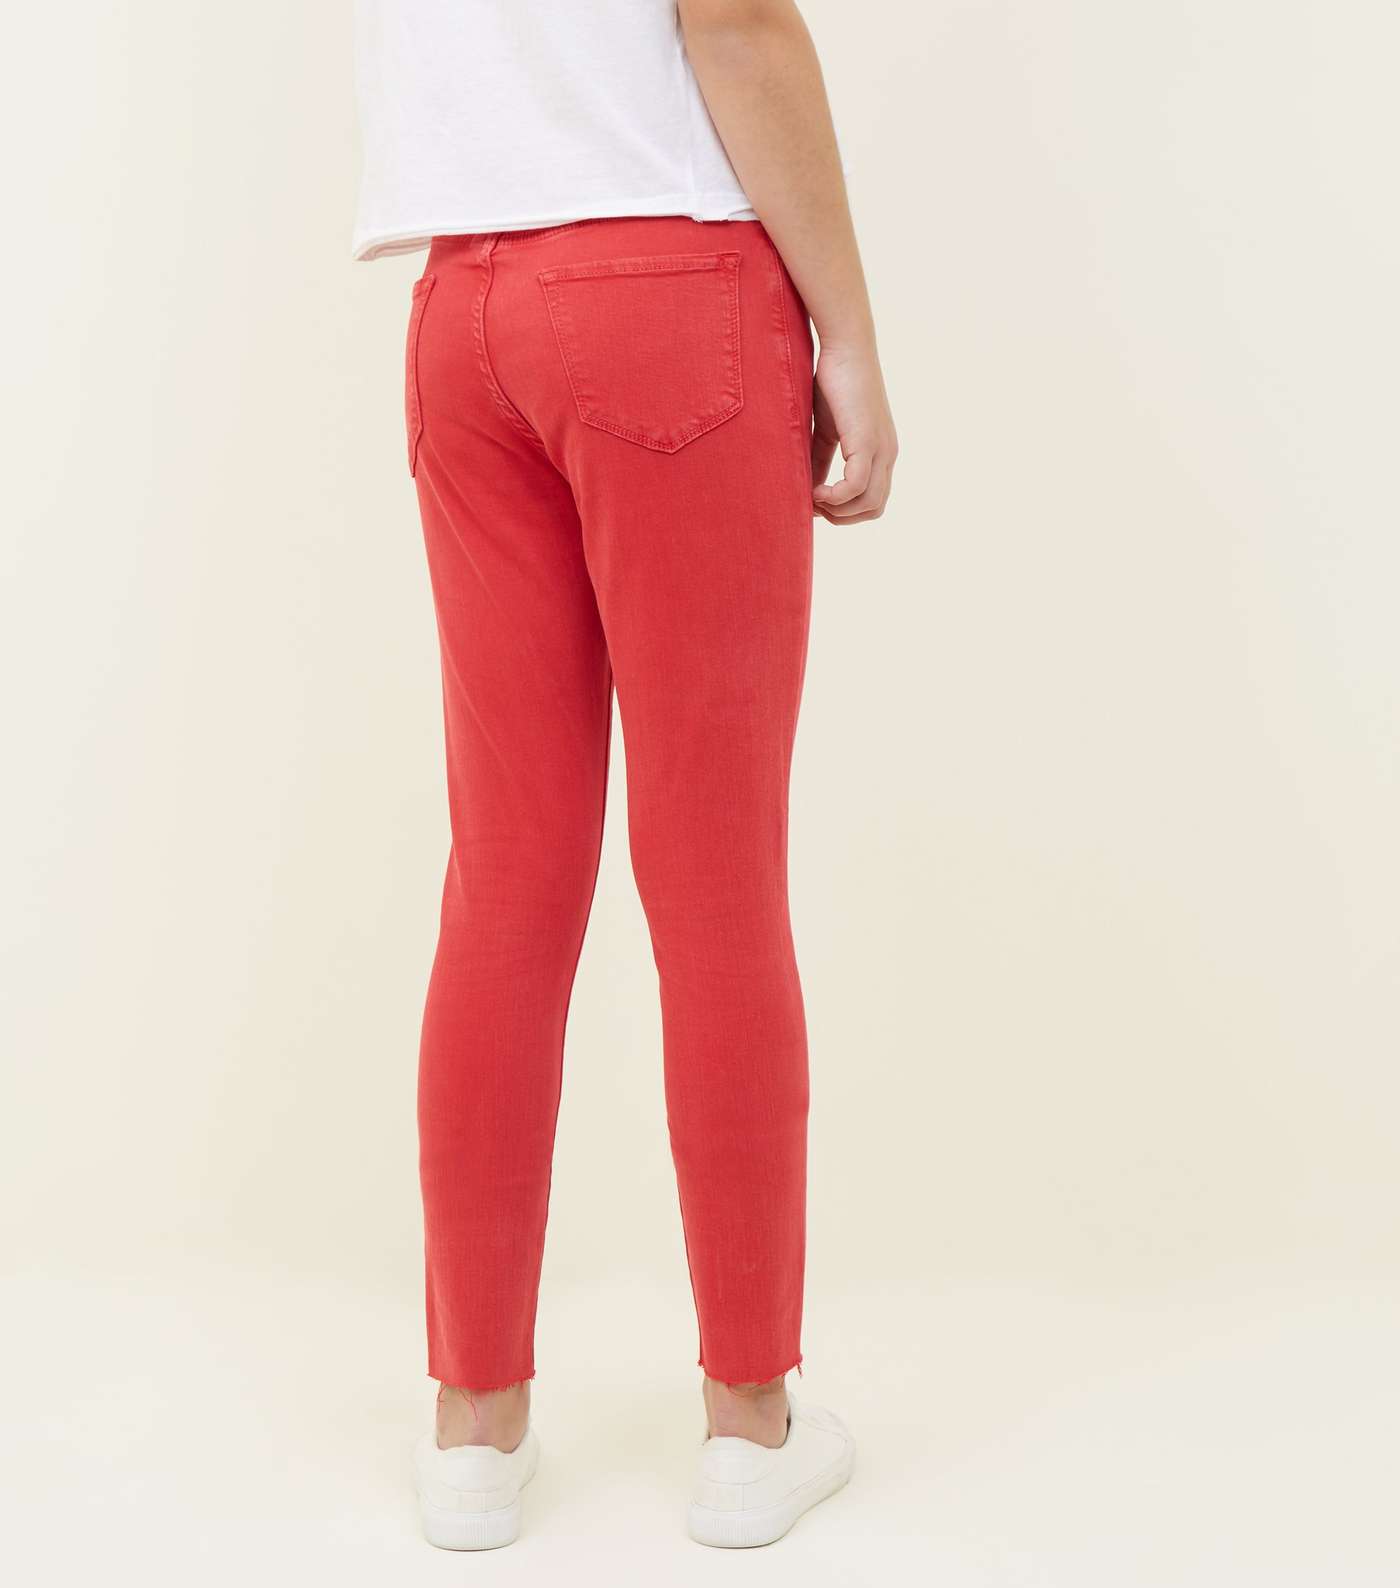 Girls Red Ripped Skinny Jeans  Image 3